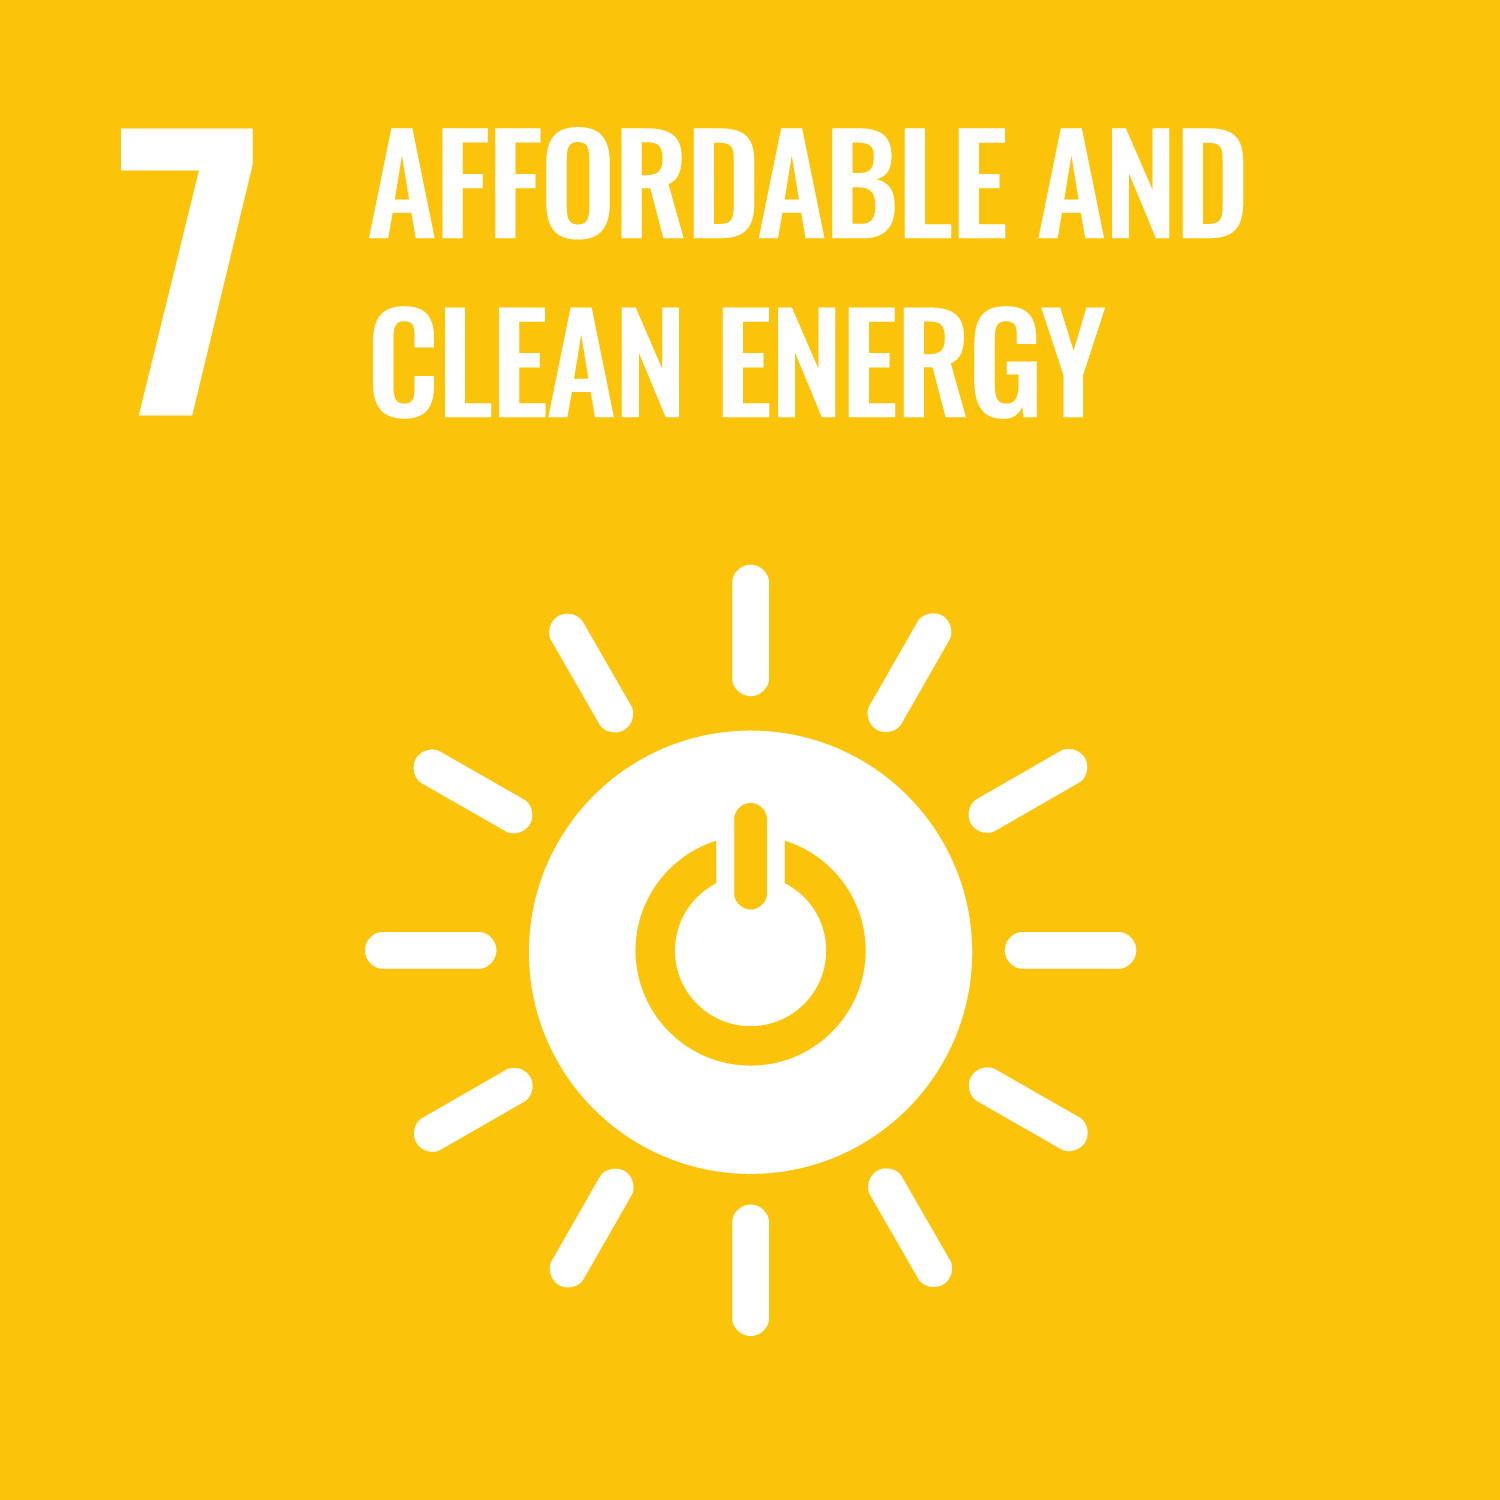 United Nation's 17 Sustainable Development Goals goal number 7